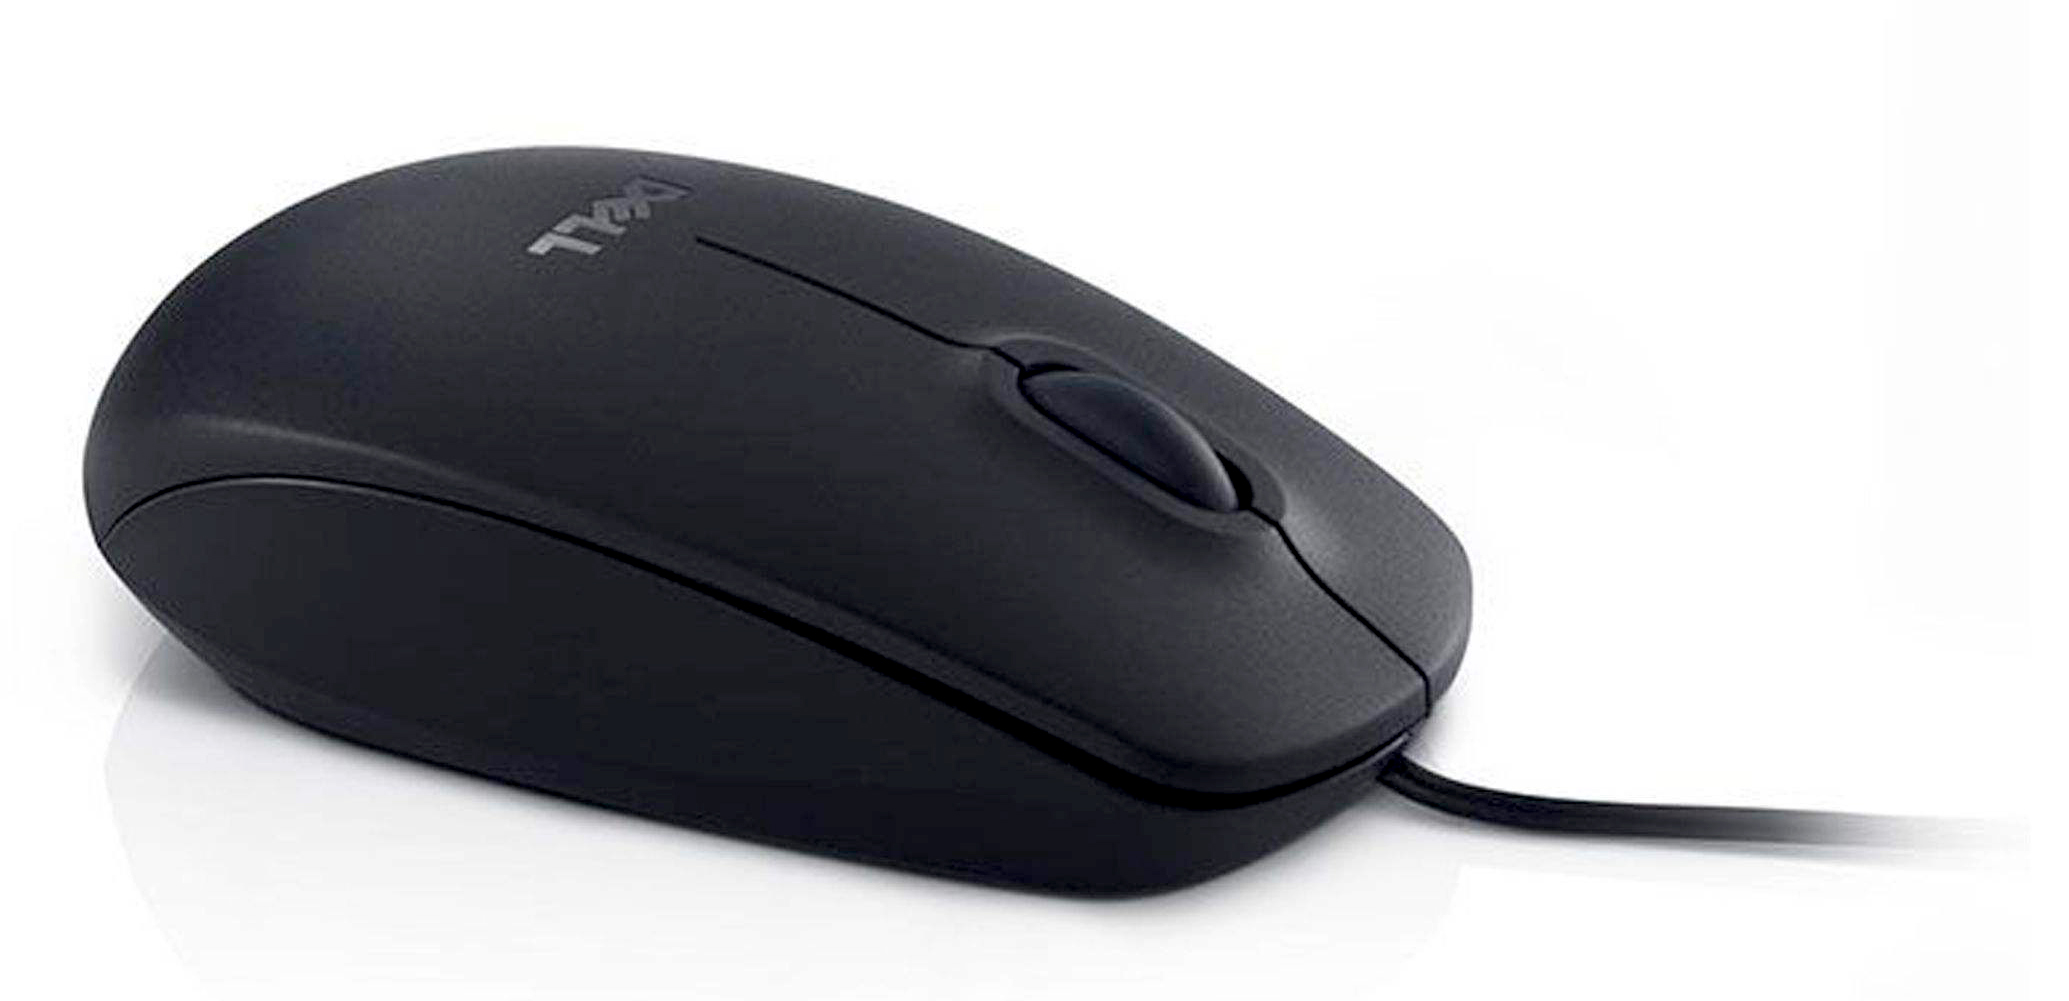 Dell MS 111 Wired Optical Mouse%20(2)